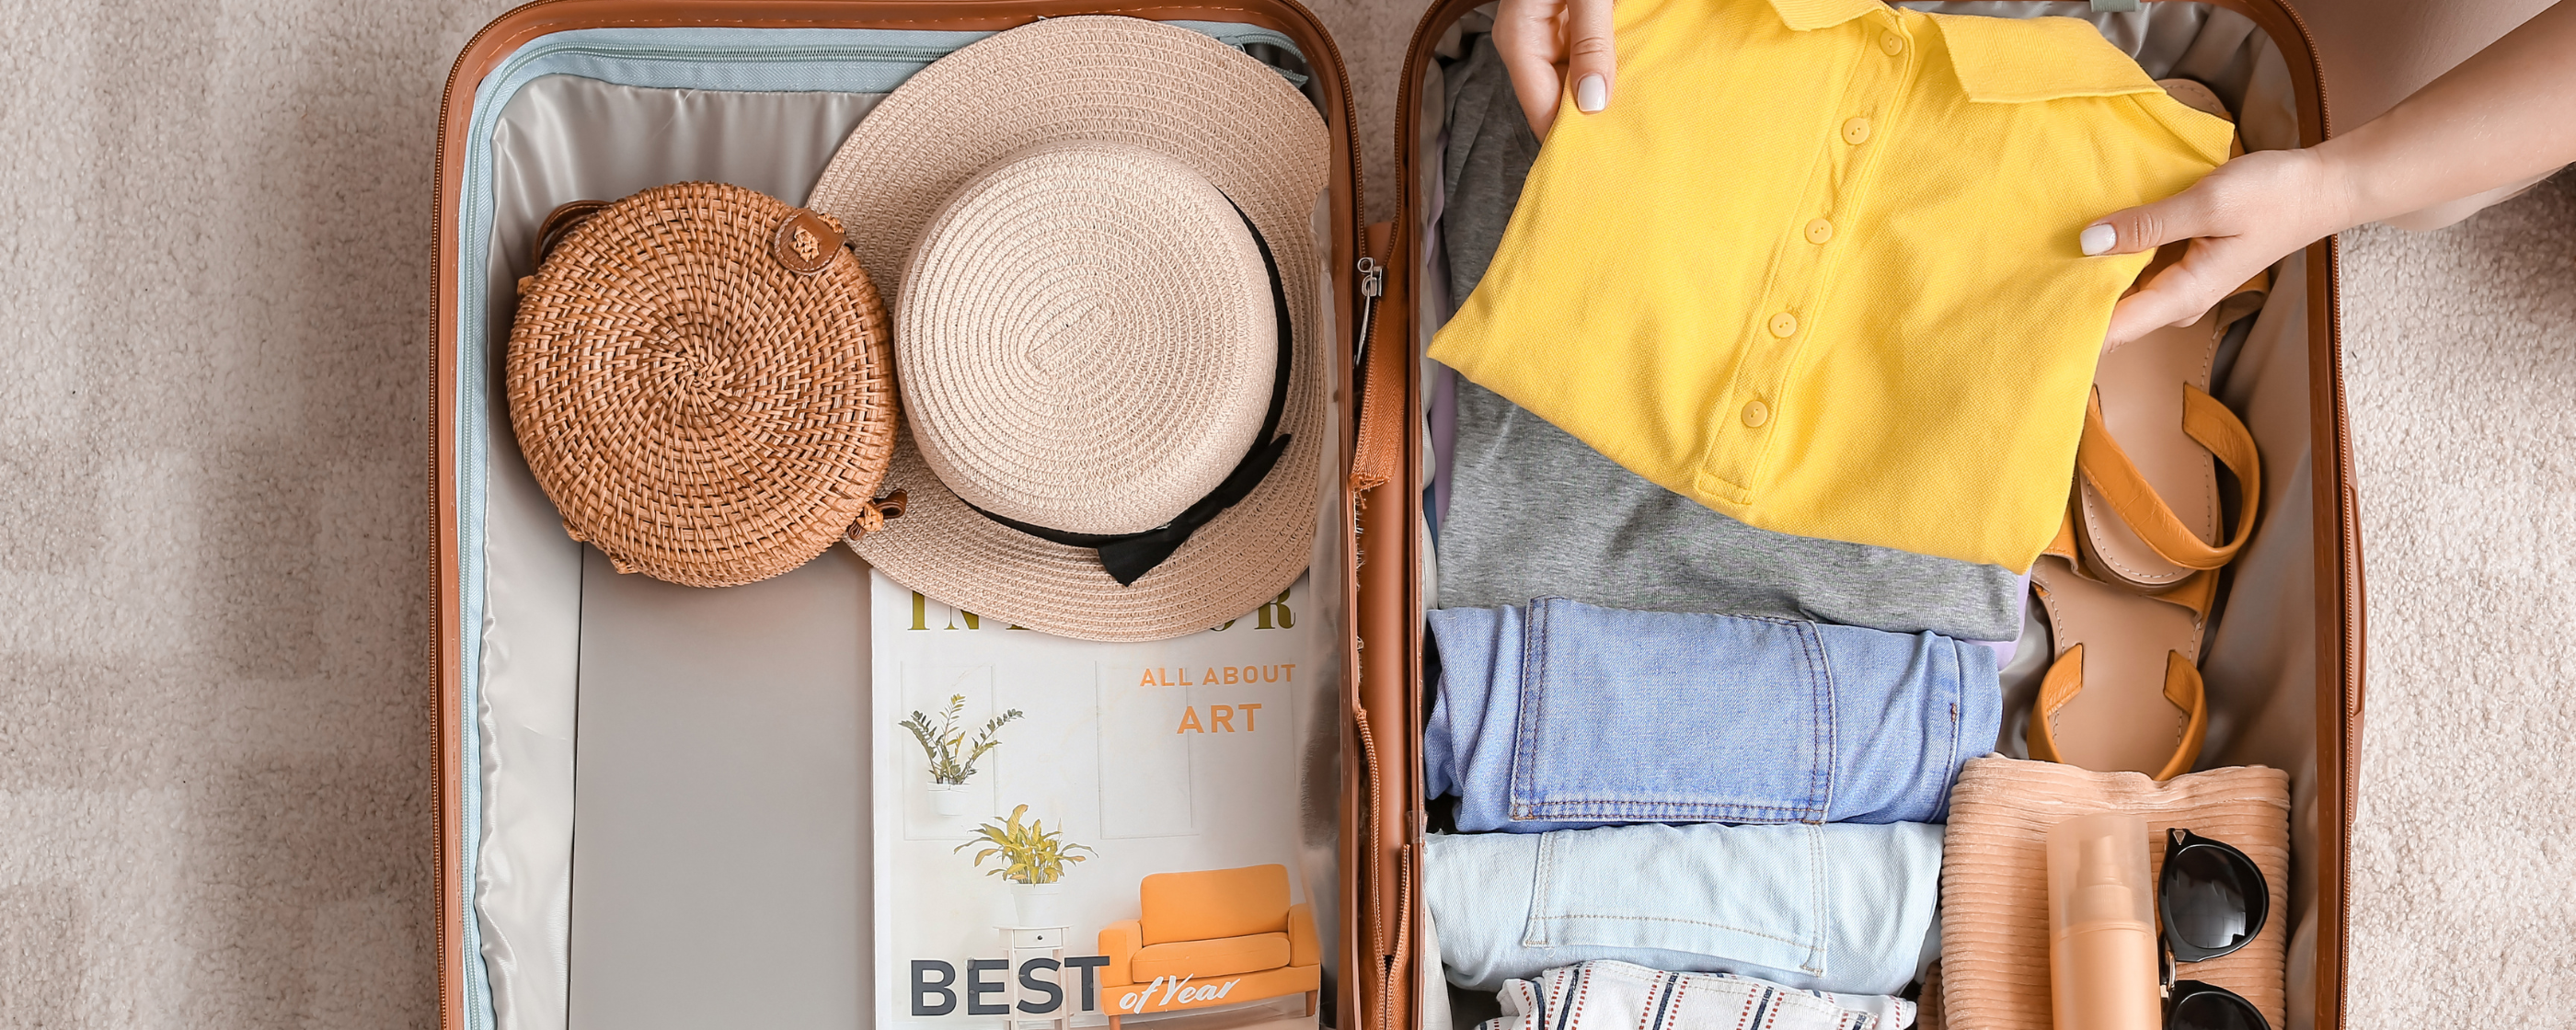 An open suitcase filled with clothing and other travel essentials.